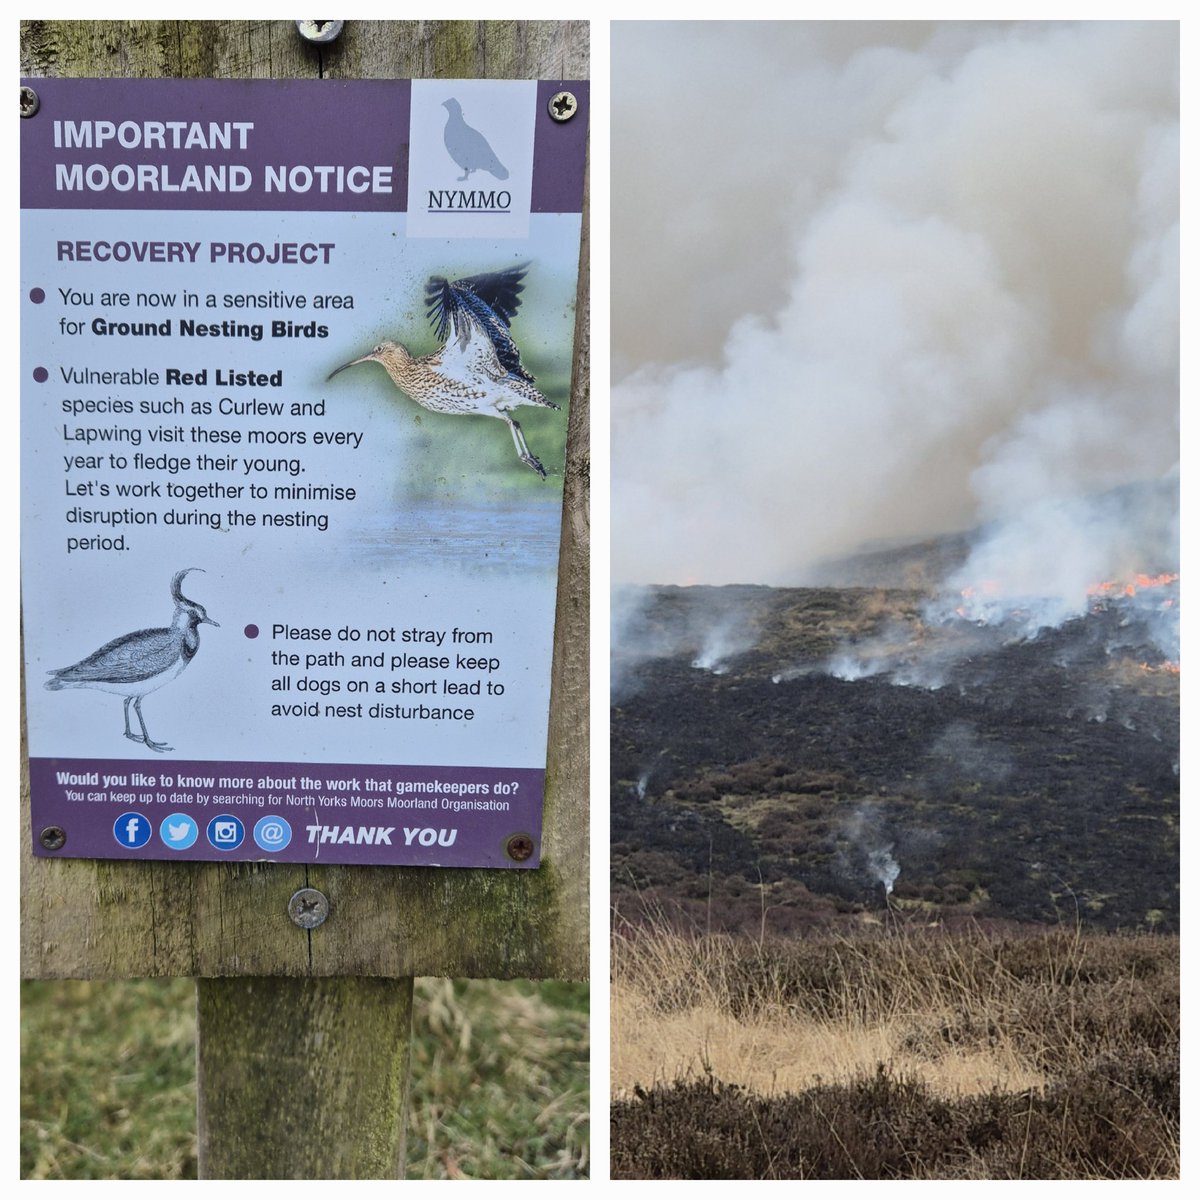 The uk's grouse moors would like you to believe one thing , in reality they do the complete opposite. Stripping vast acres of biodiversity through burning, trapping and poisoning.